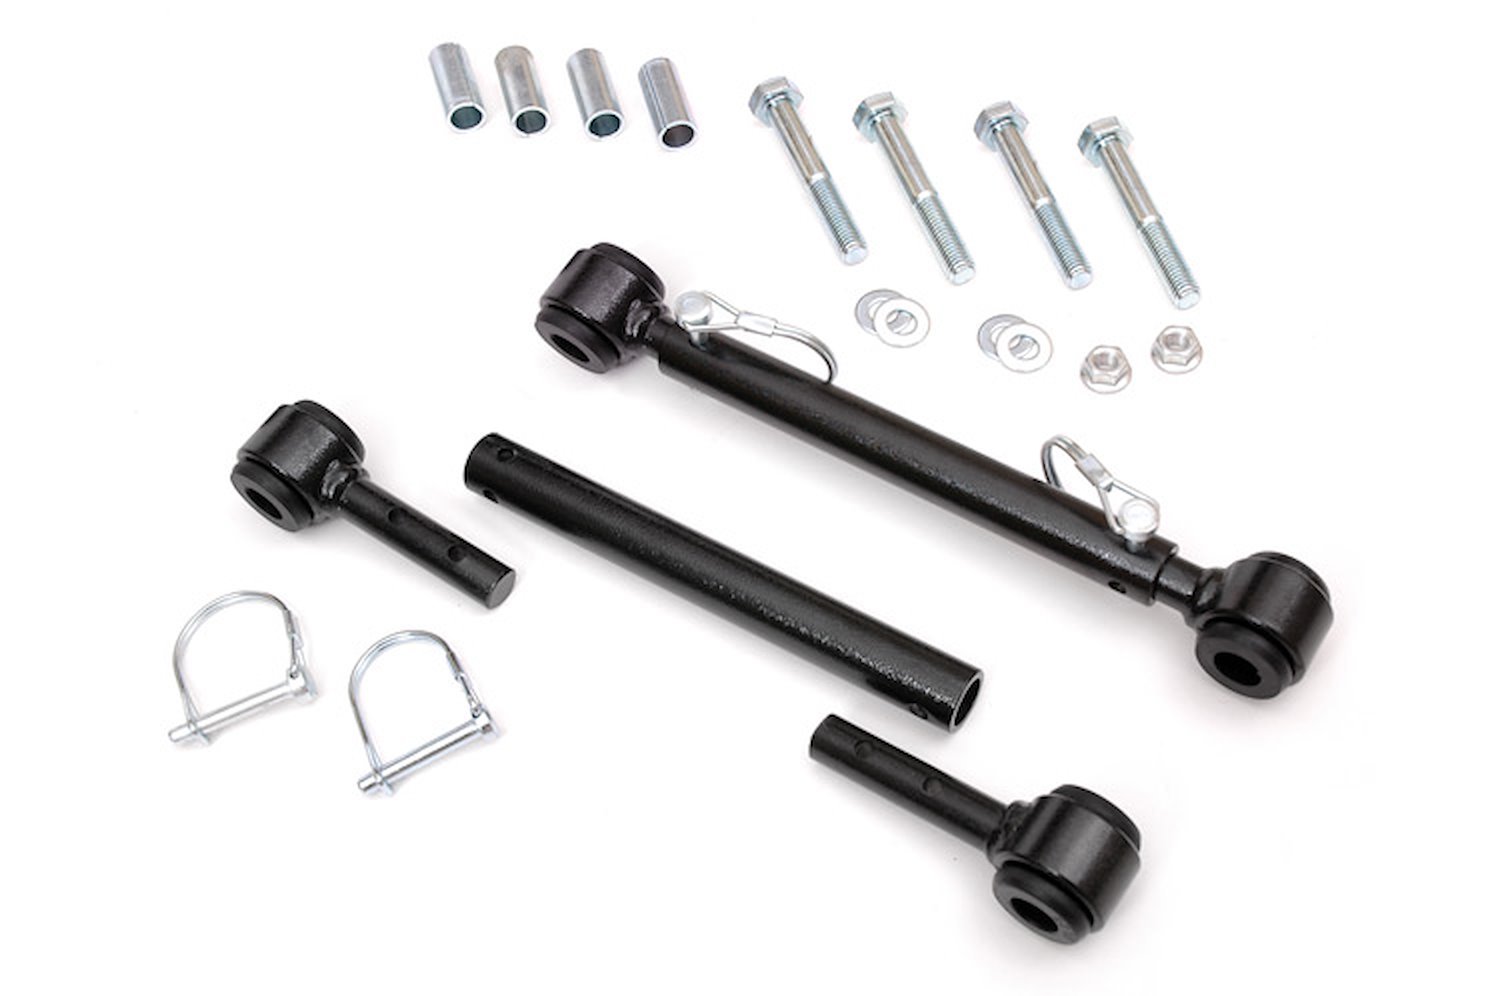 1188 Rear Sway Bar Quick Disconnects for 4-6-inch Lifts